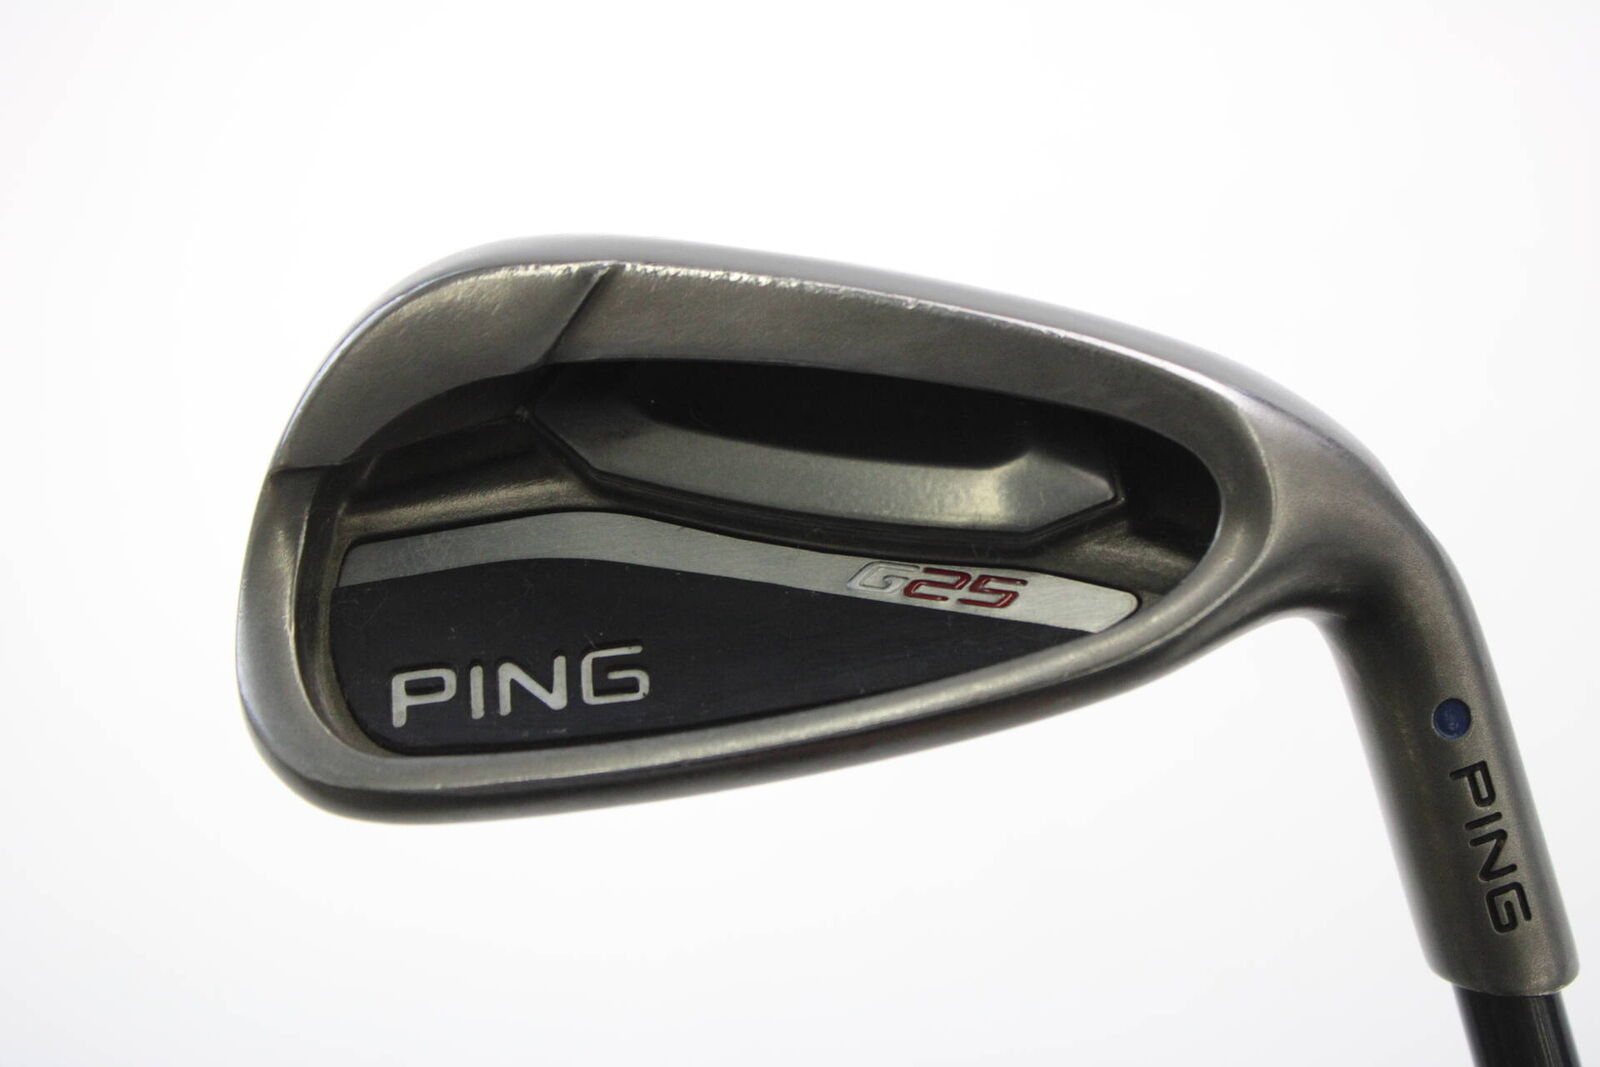 Ping G25 Iron Set 5-PW and SW Lite Right-Handed Graphite #8568 Golf Clubs